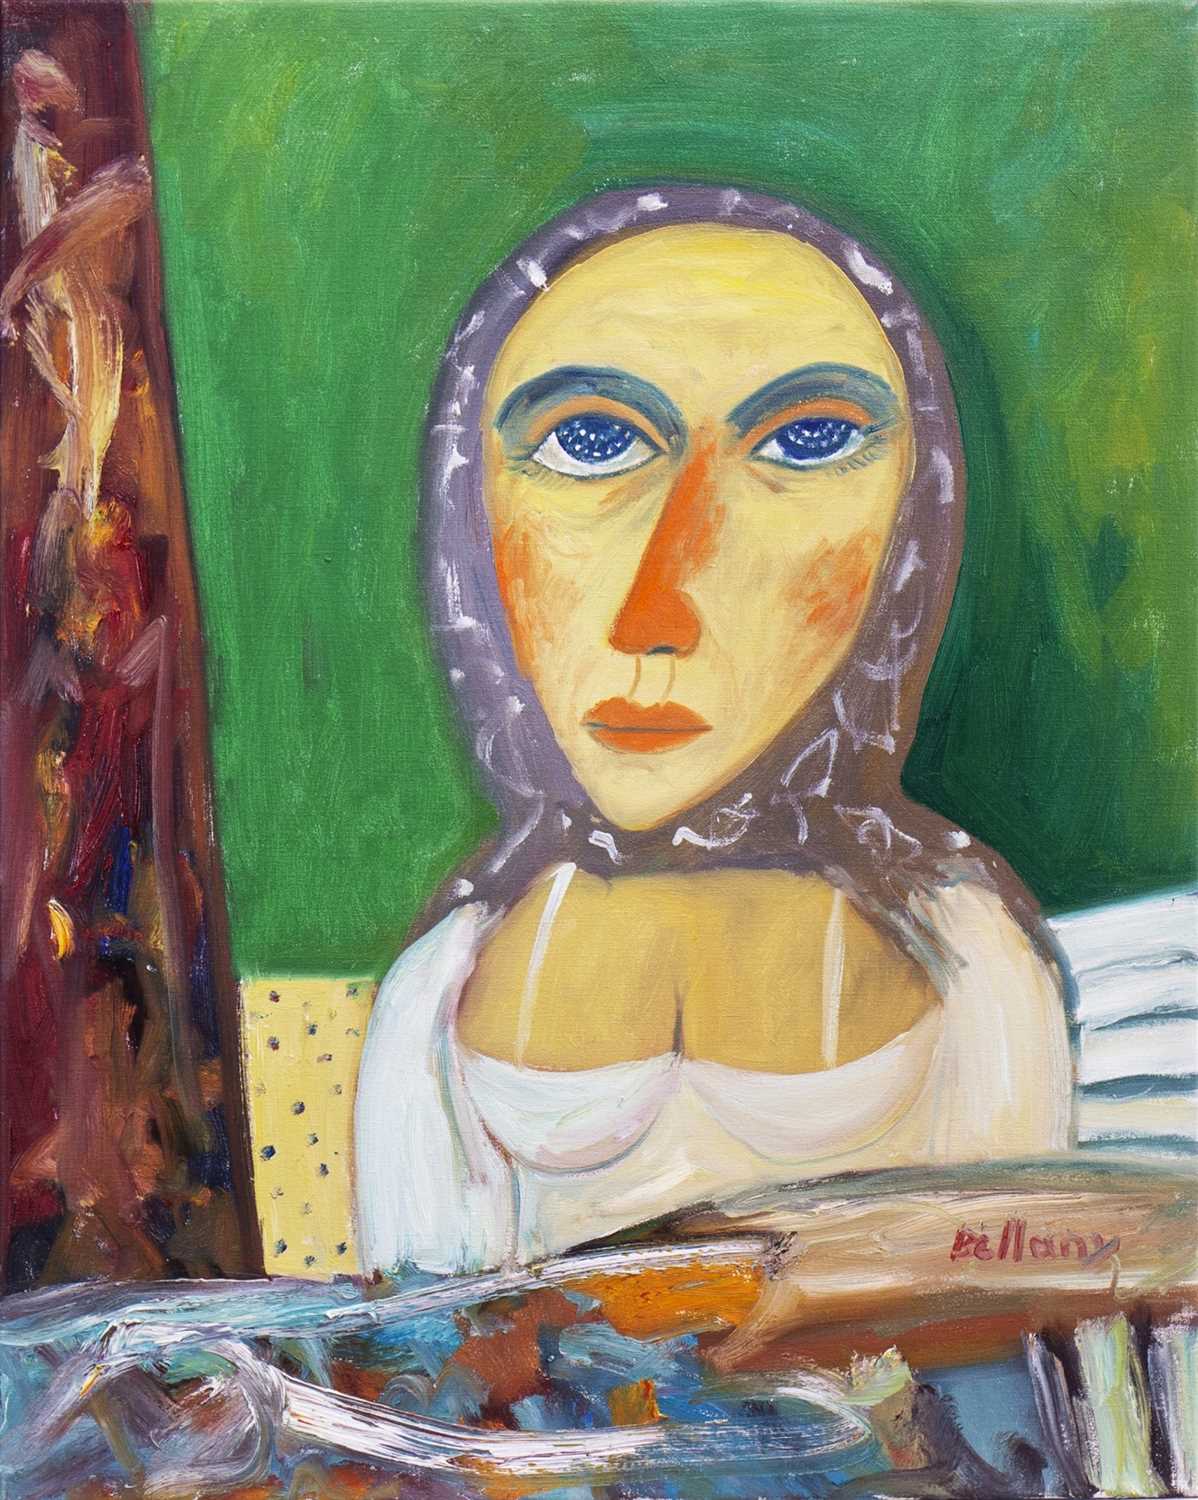 Lot 705 - WOMAN OF THE NORTH, AN OIL BY JOHN BELLANY